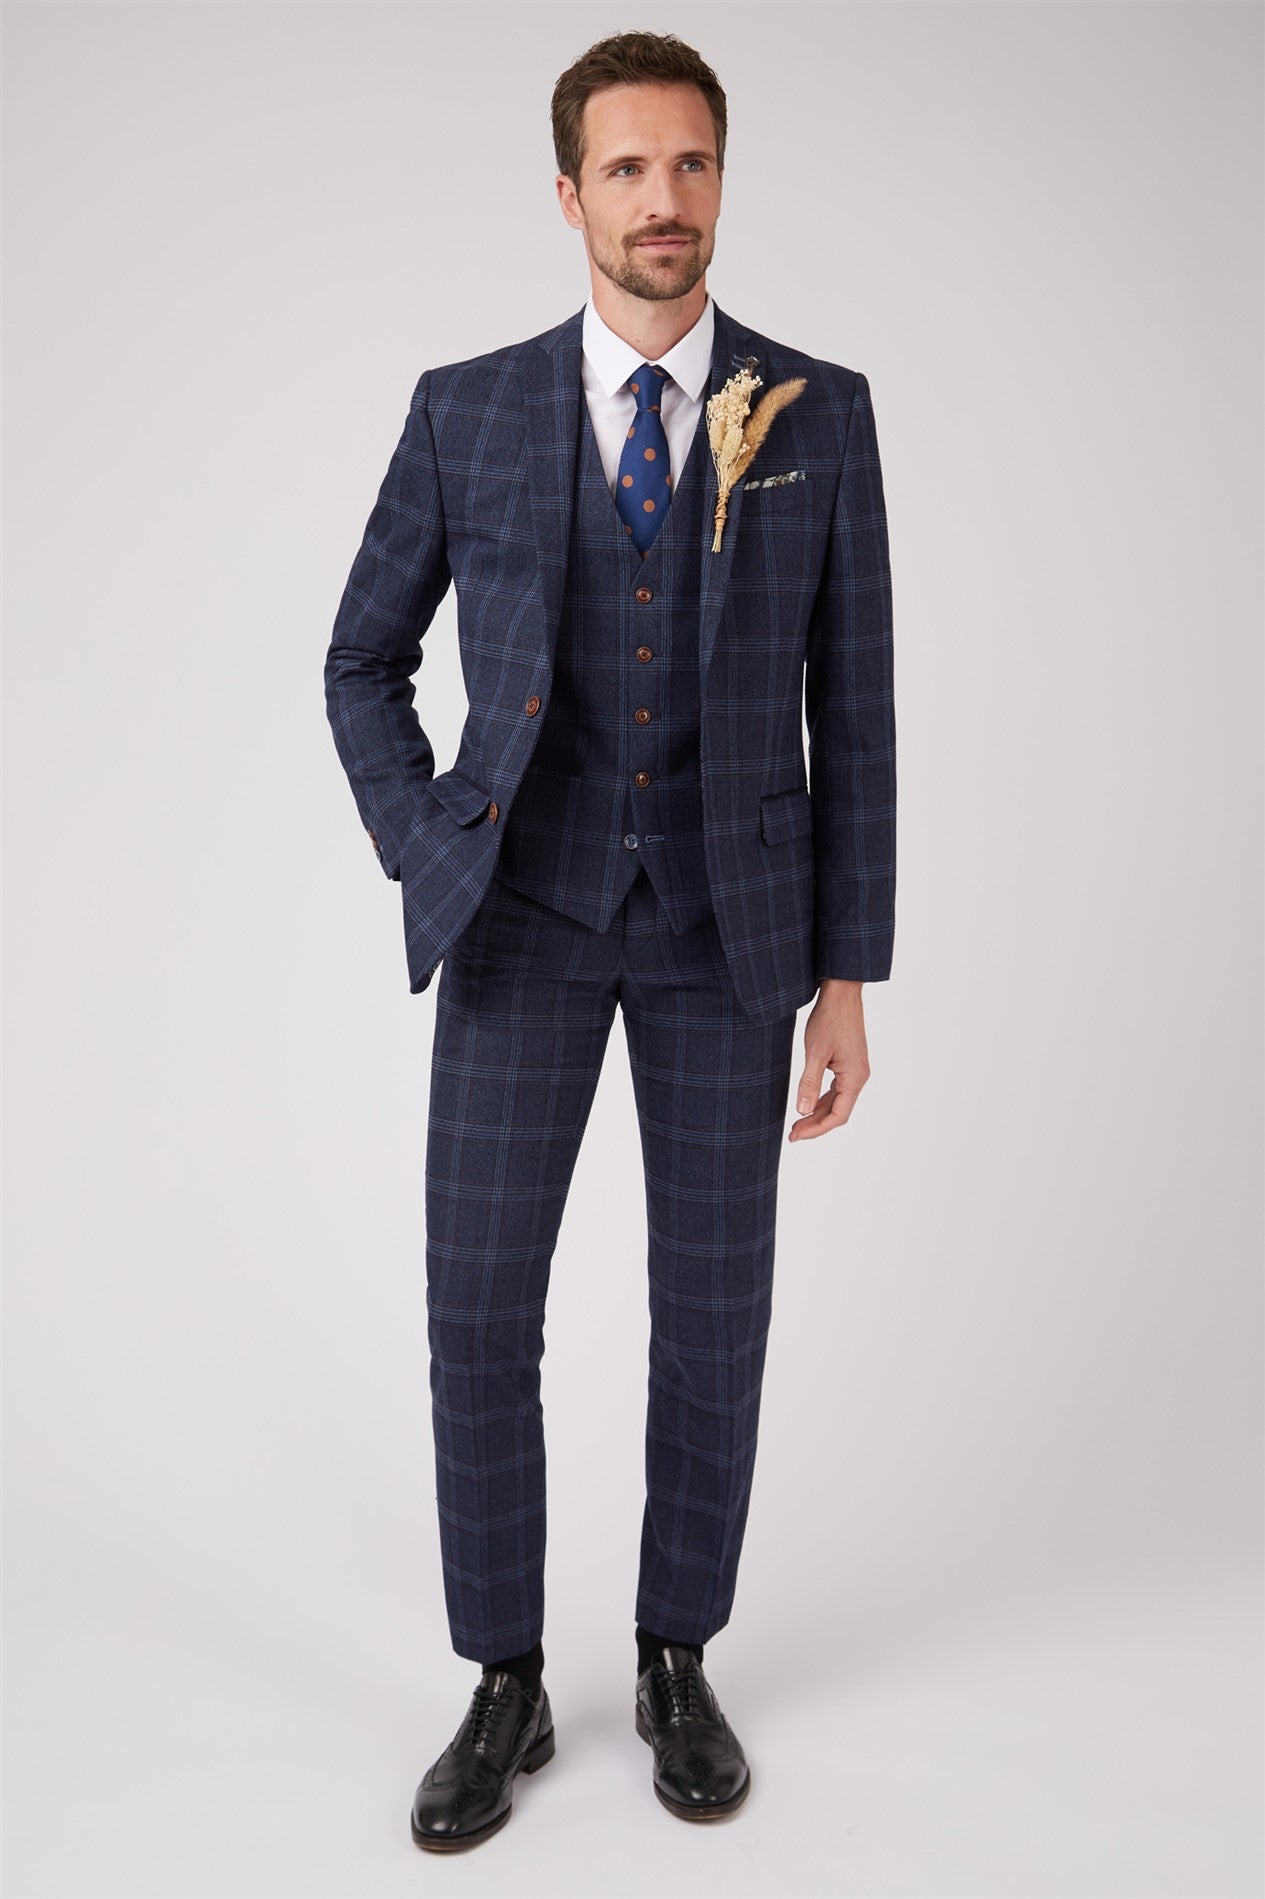 Navy Blue Over Check Suit from Antique Rogue - Jacket